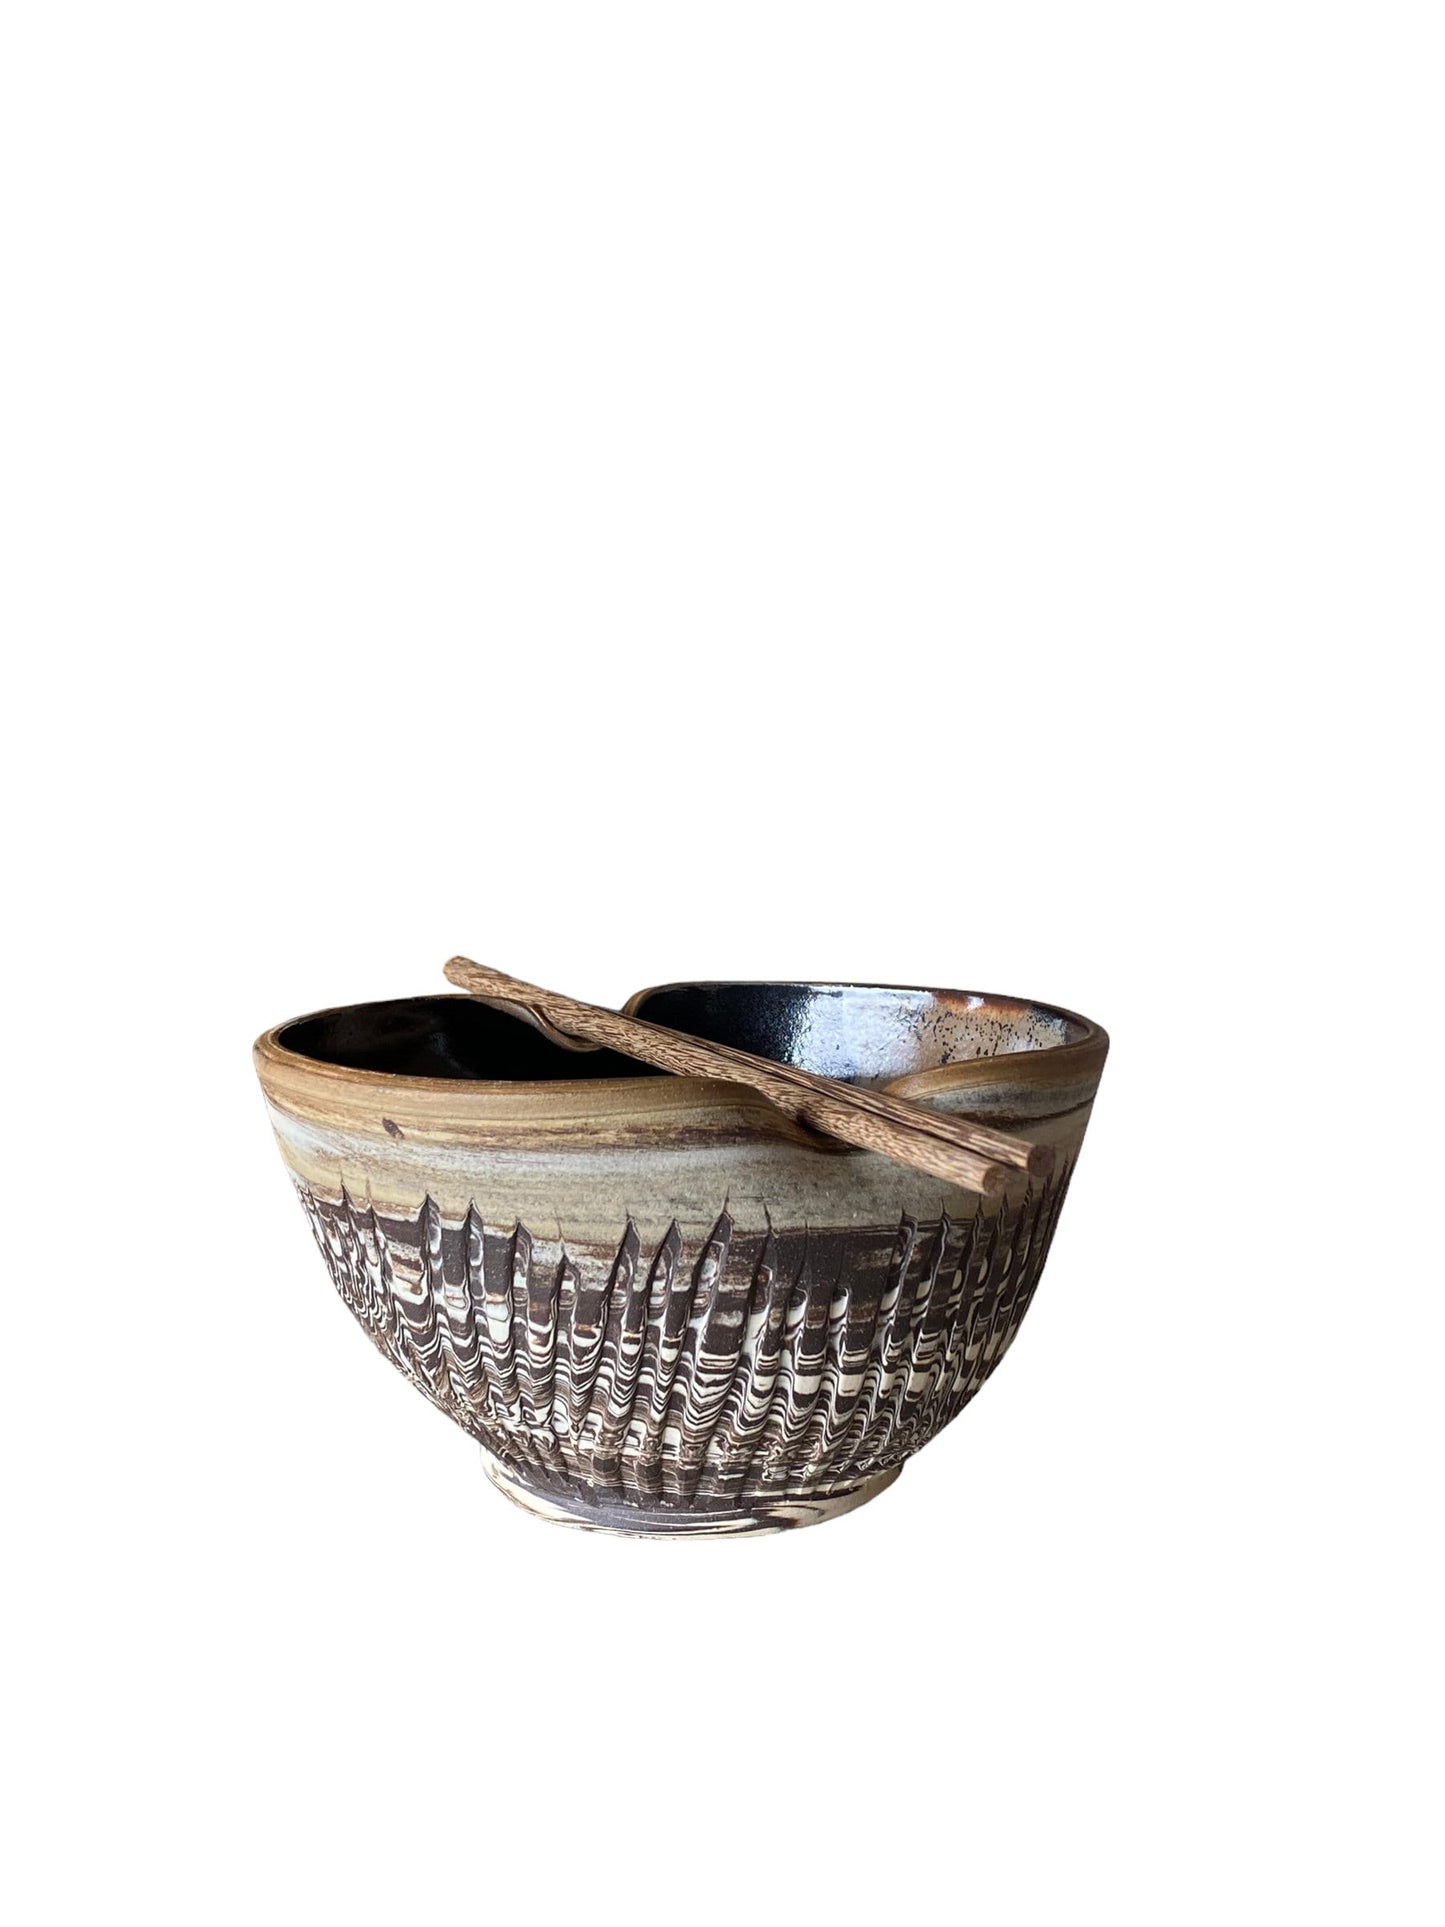 Small Agateware Rice or Noodle Bowl with Coordinating Chopsticks: Stylish Dining Essentials for Your Asian Cuisine